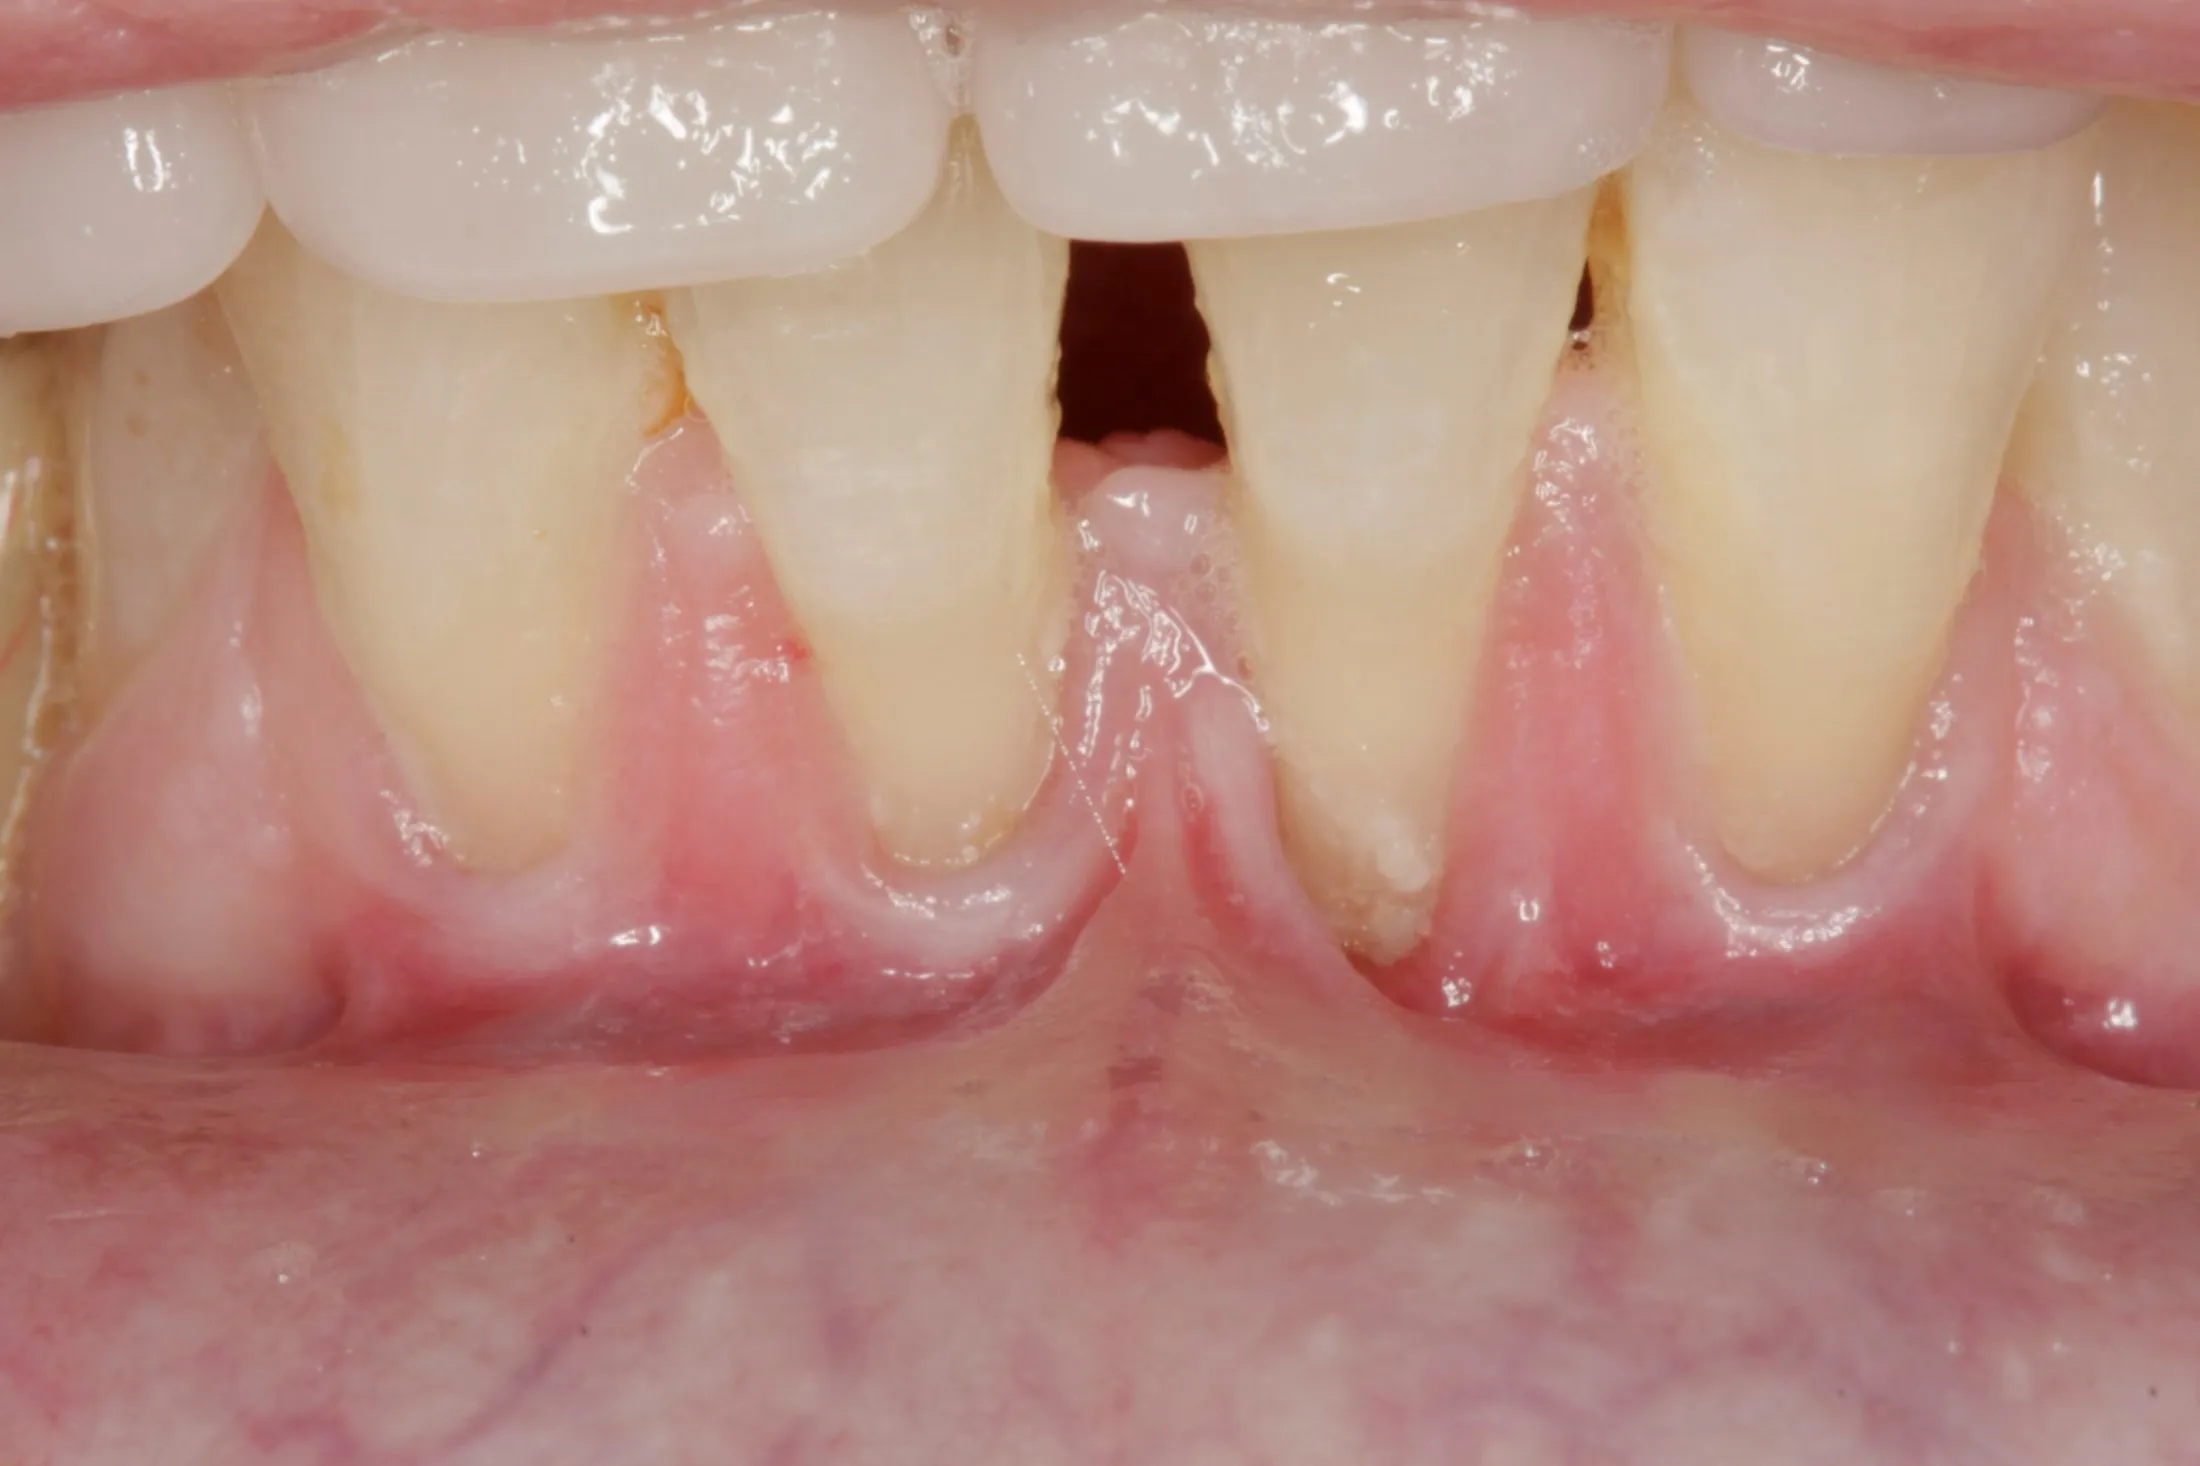 Prior to gum grafting, detailed view of gums needing treatment.